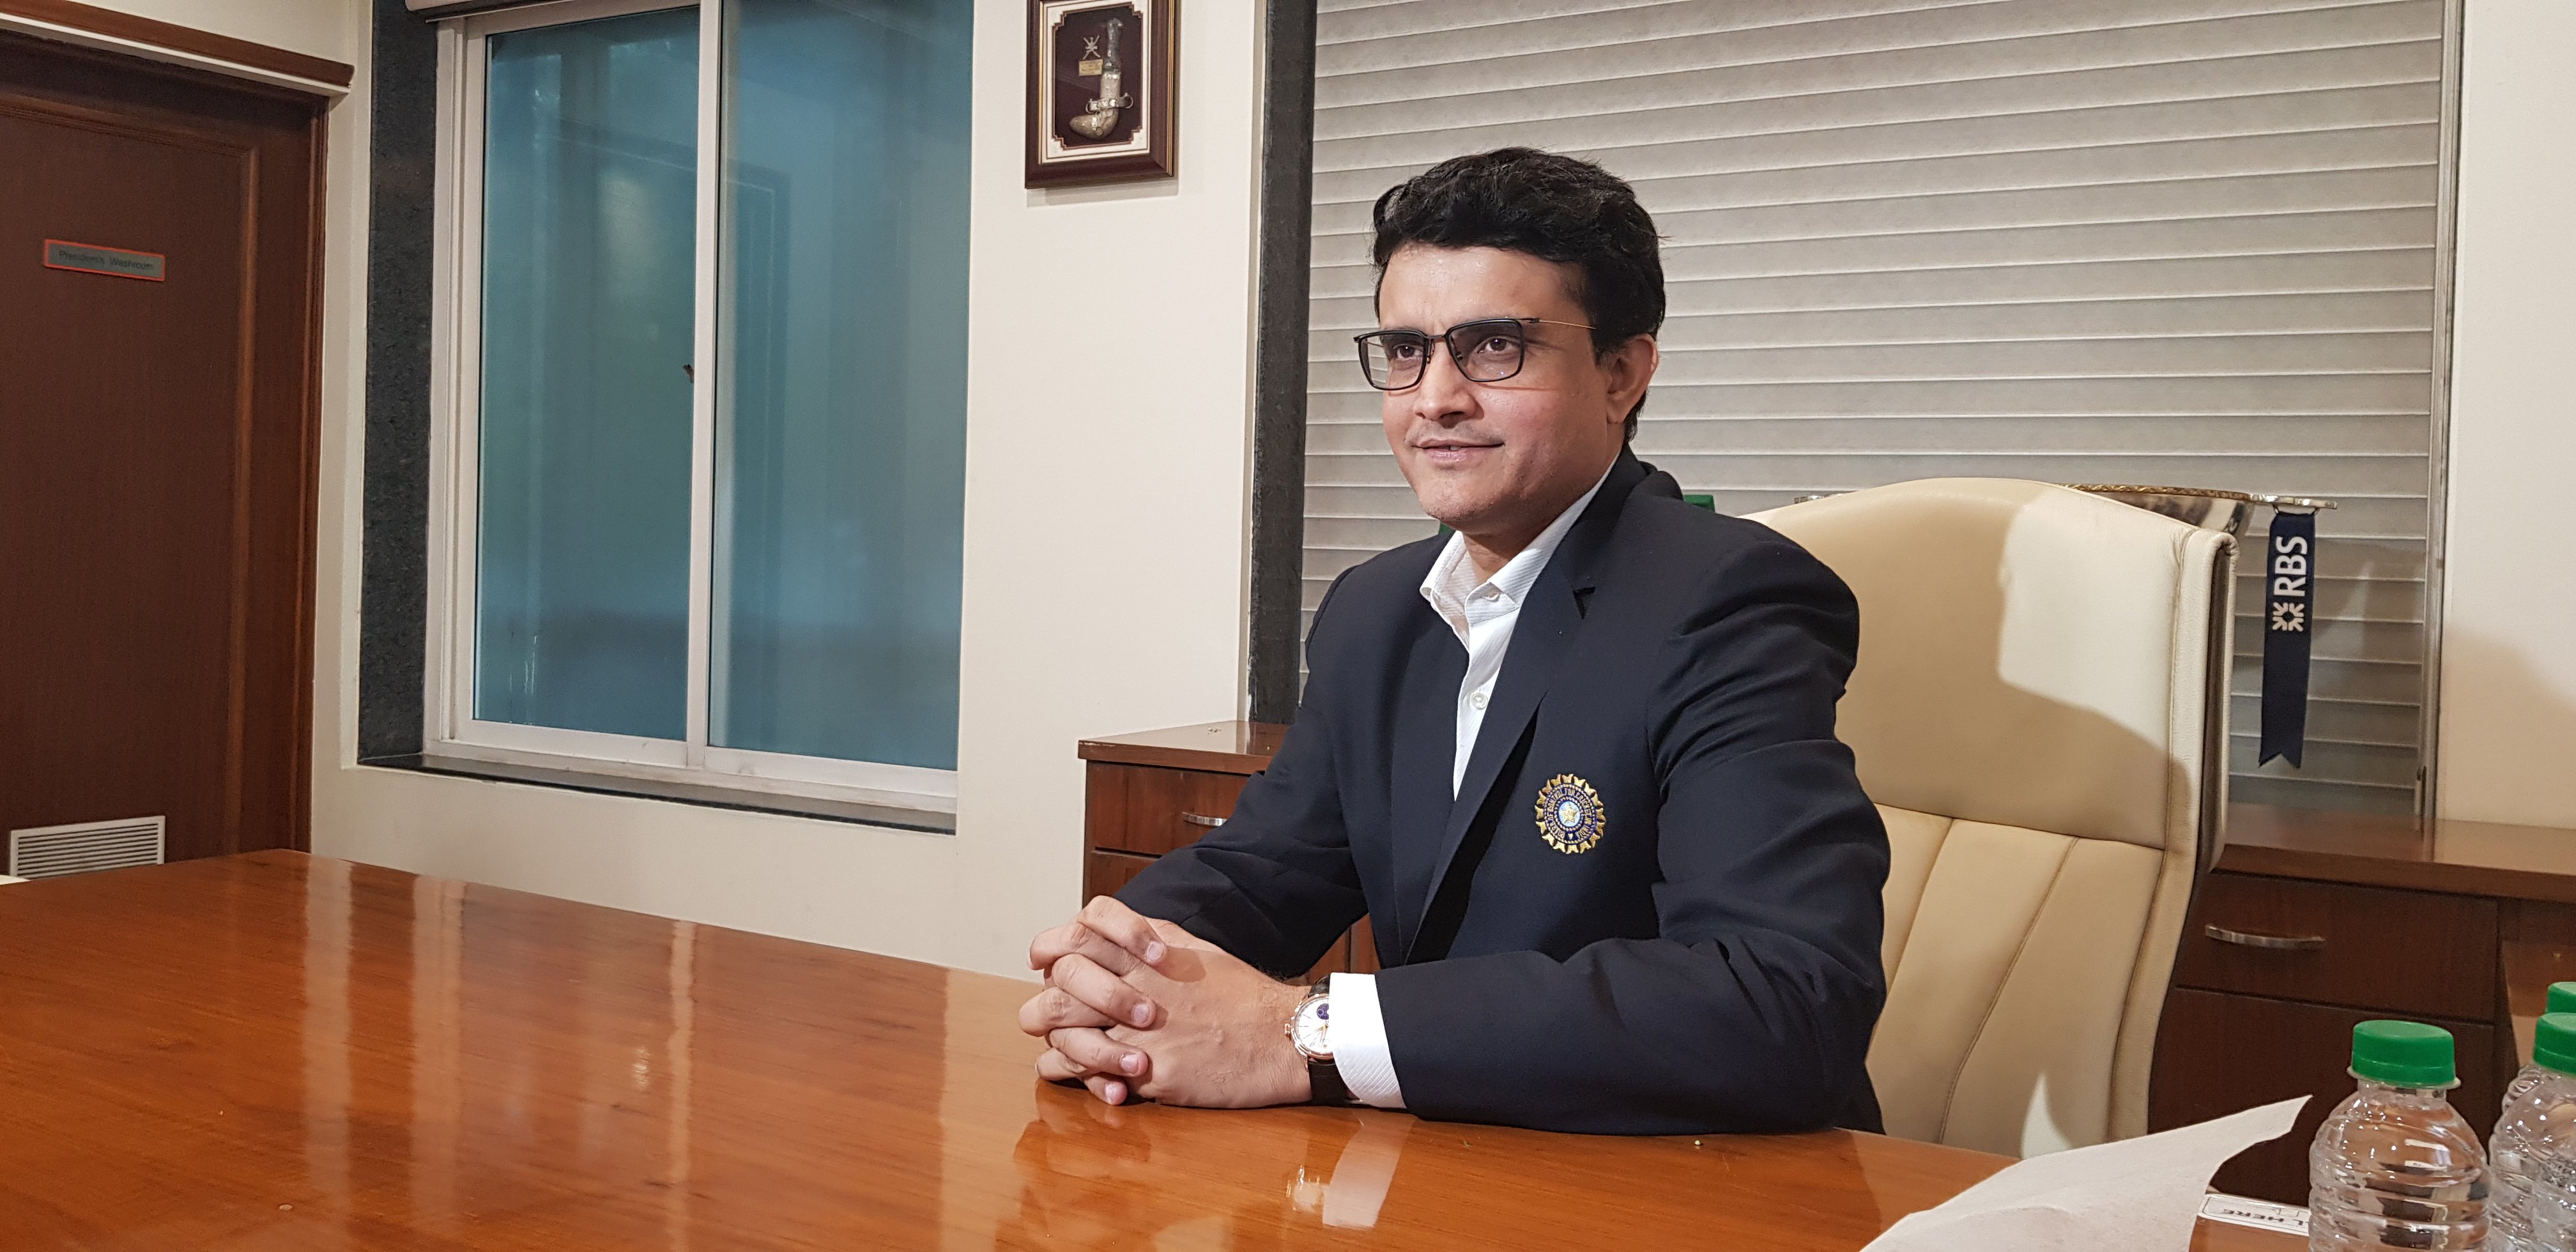 Virat Kohli has got to find his way and become successful, states Sourav Ganguly